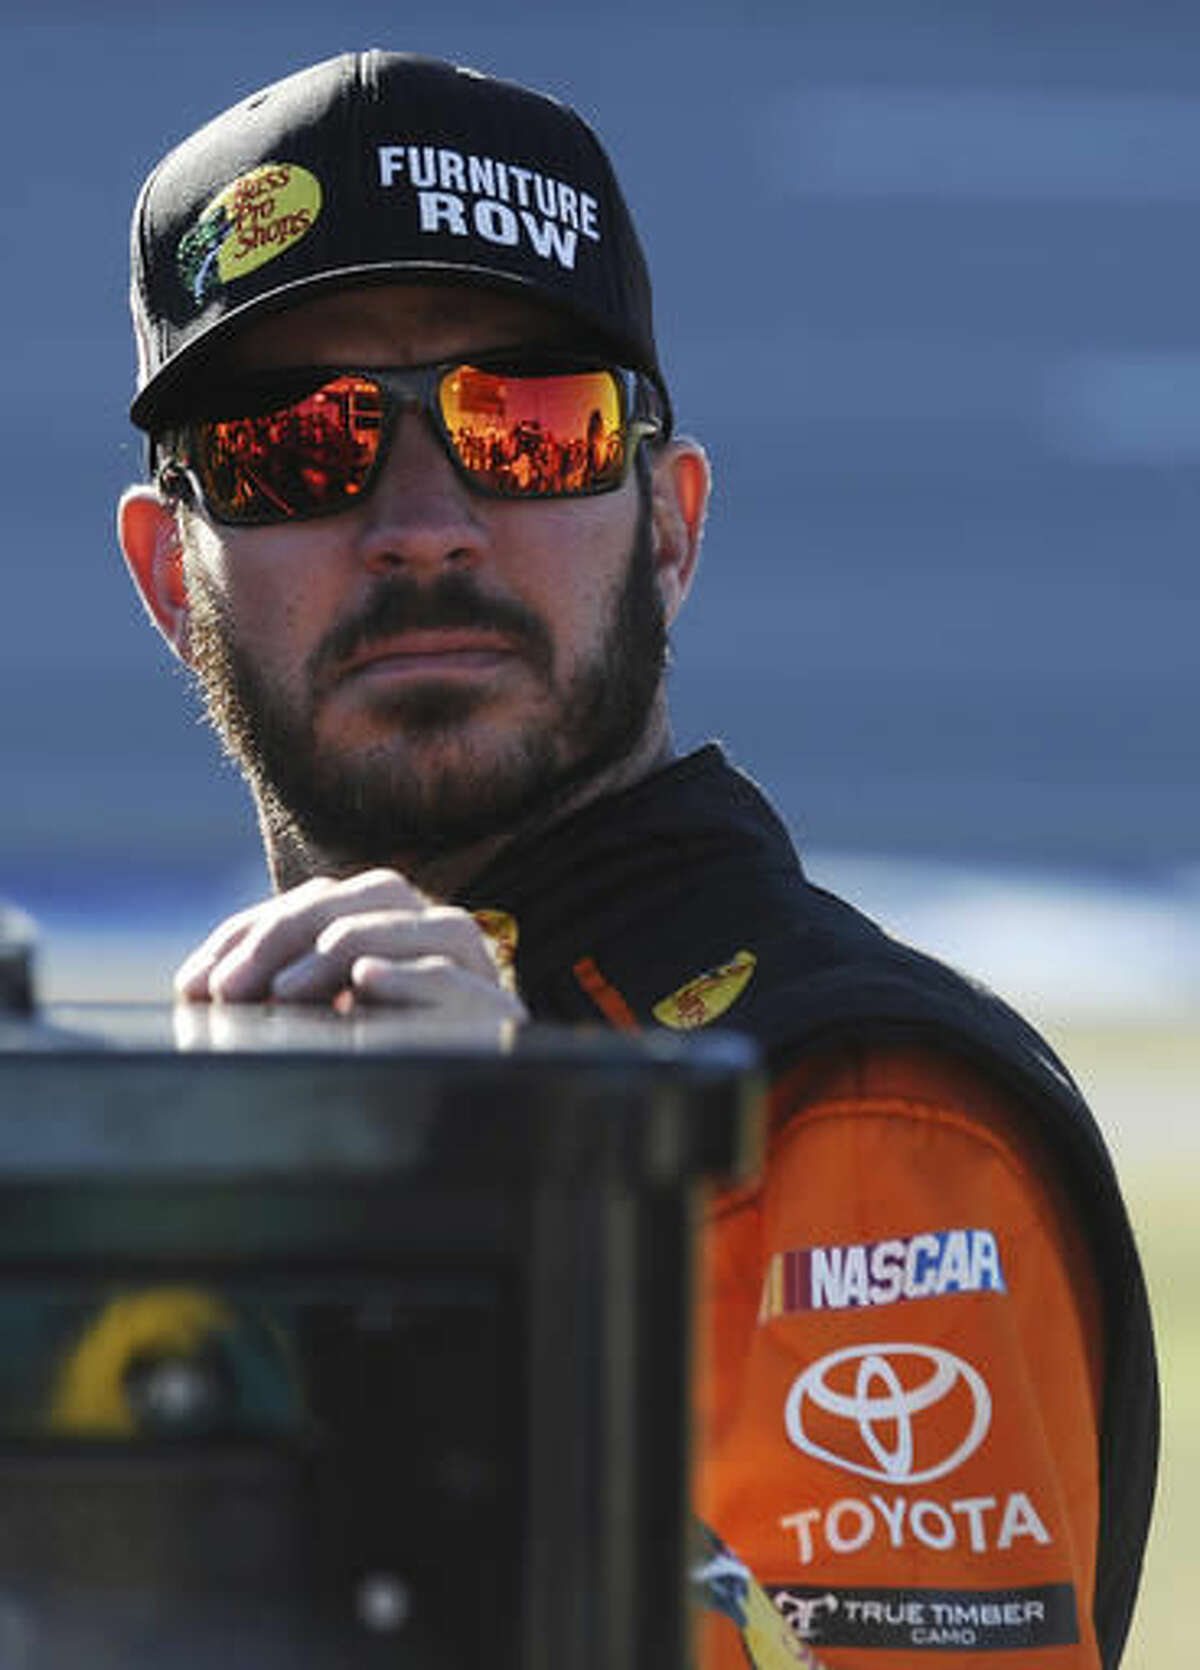 Martin Truex Jr. stands on pit road before qualifying for Sunday's NASCAR Sprint Cup auto race at Talladega Superspeedway on Saturday, Oct. 22, 2016, in Talladega, Ala. (AP Photo/Rainier Ehrhardt)